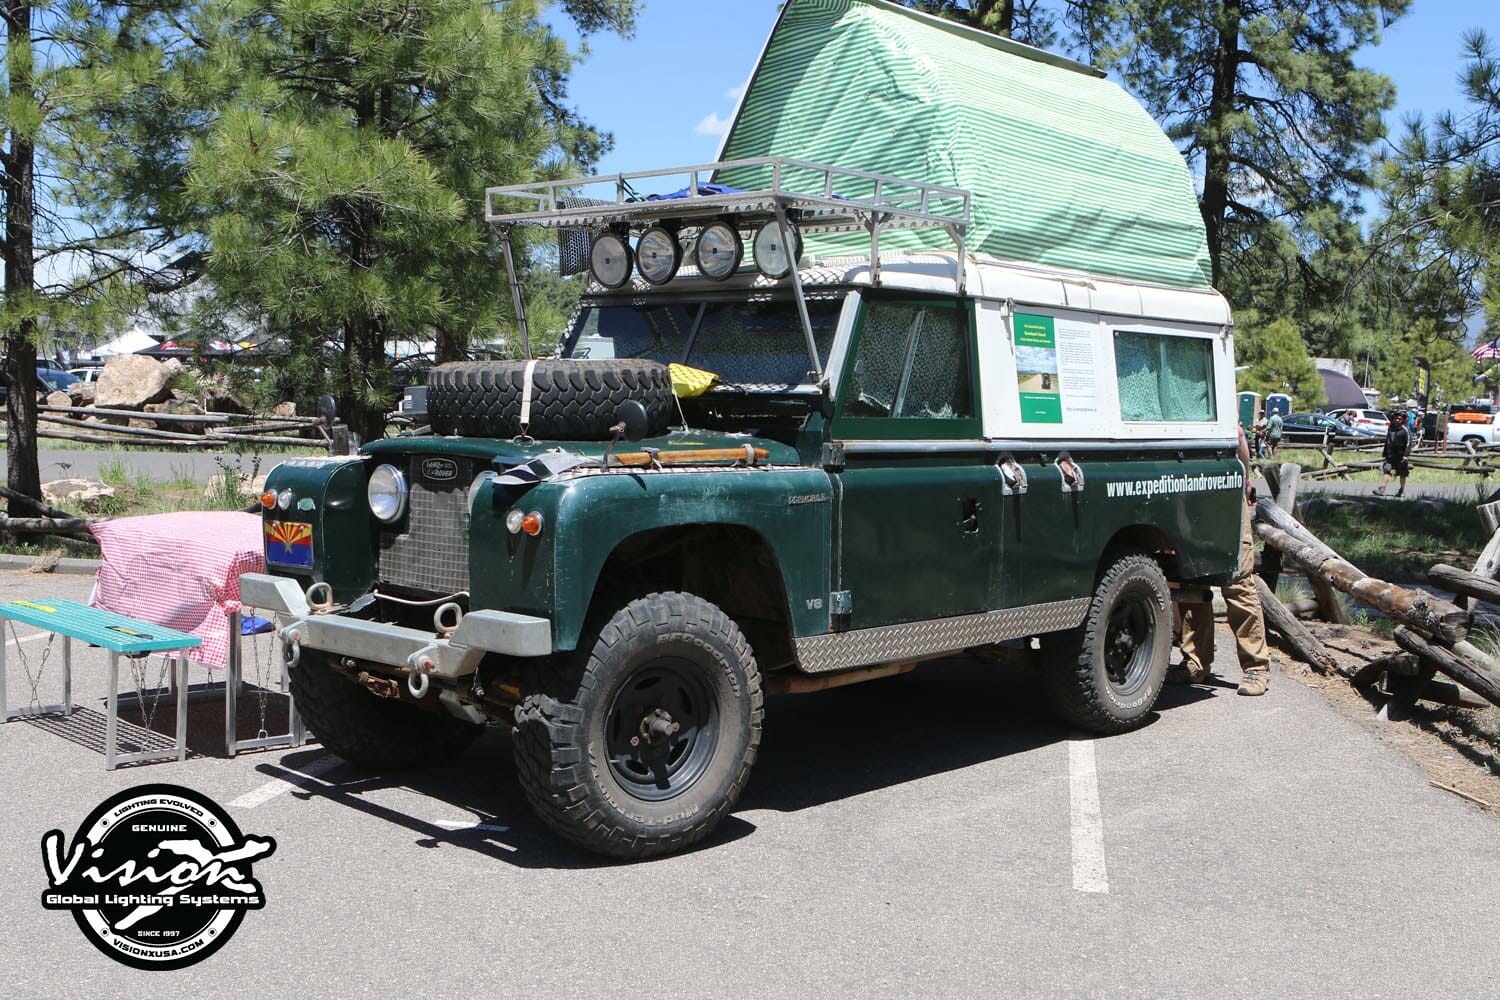 Vision_X_Overland_Expo_004